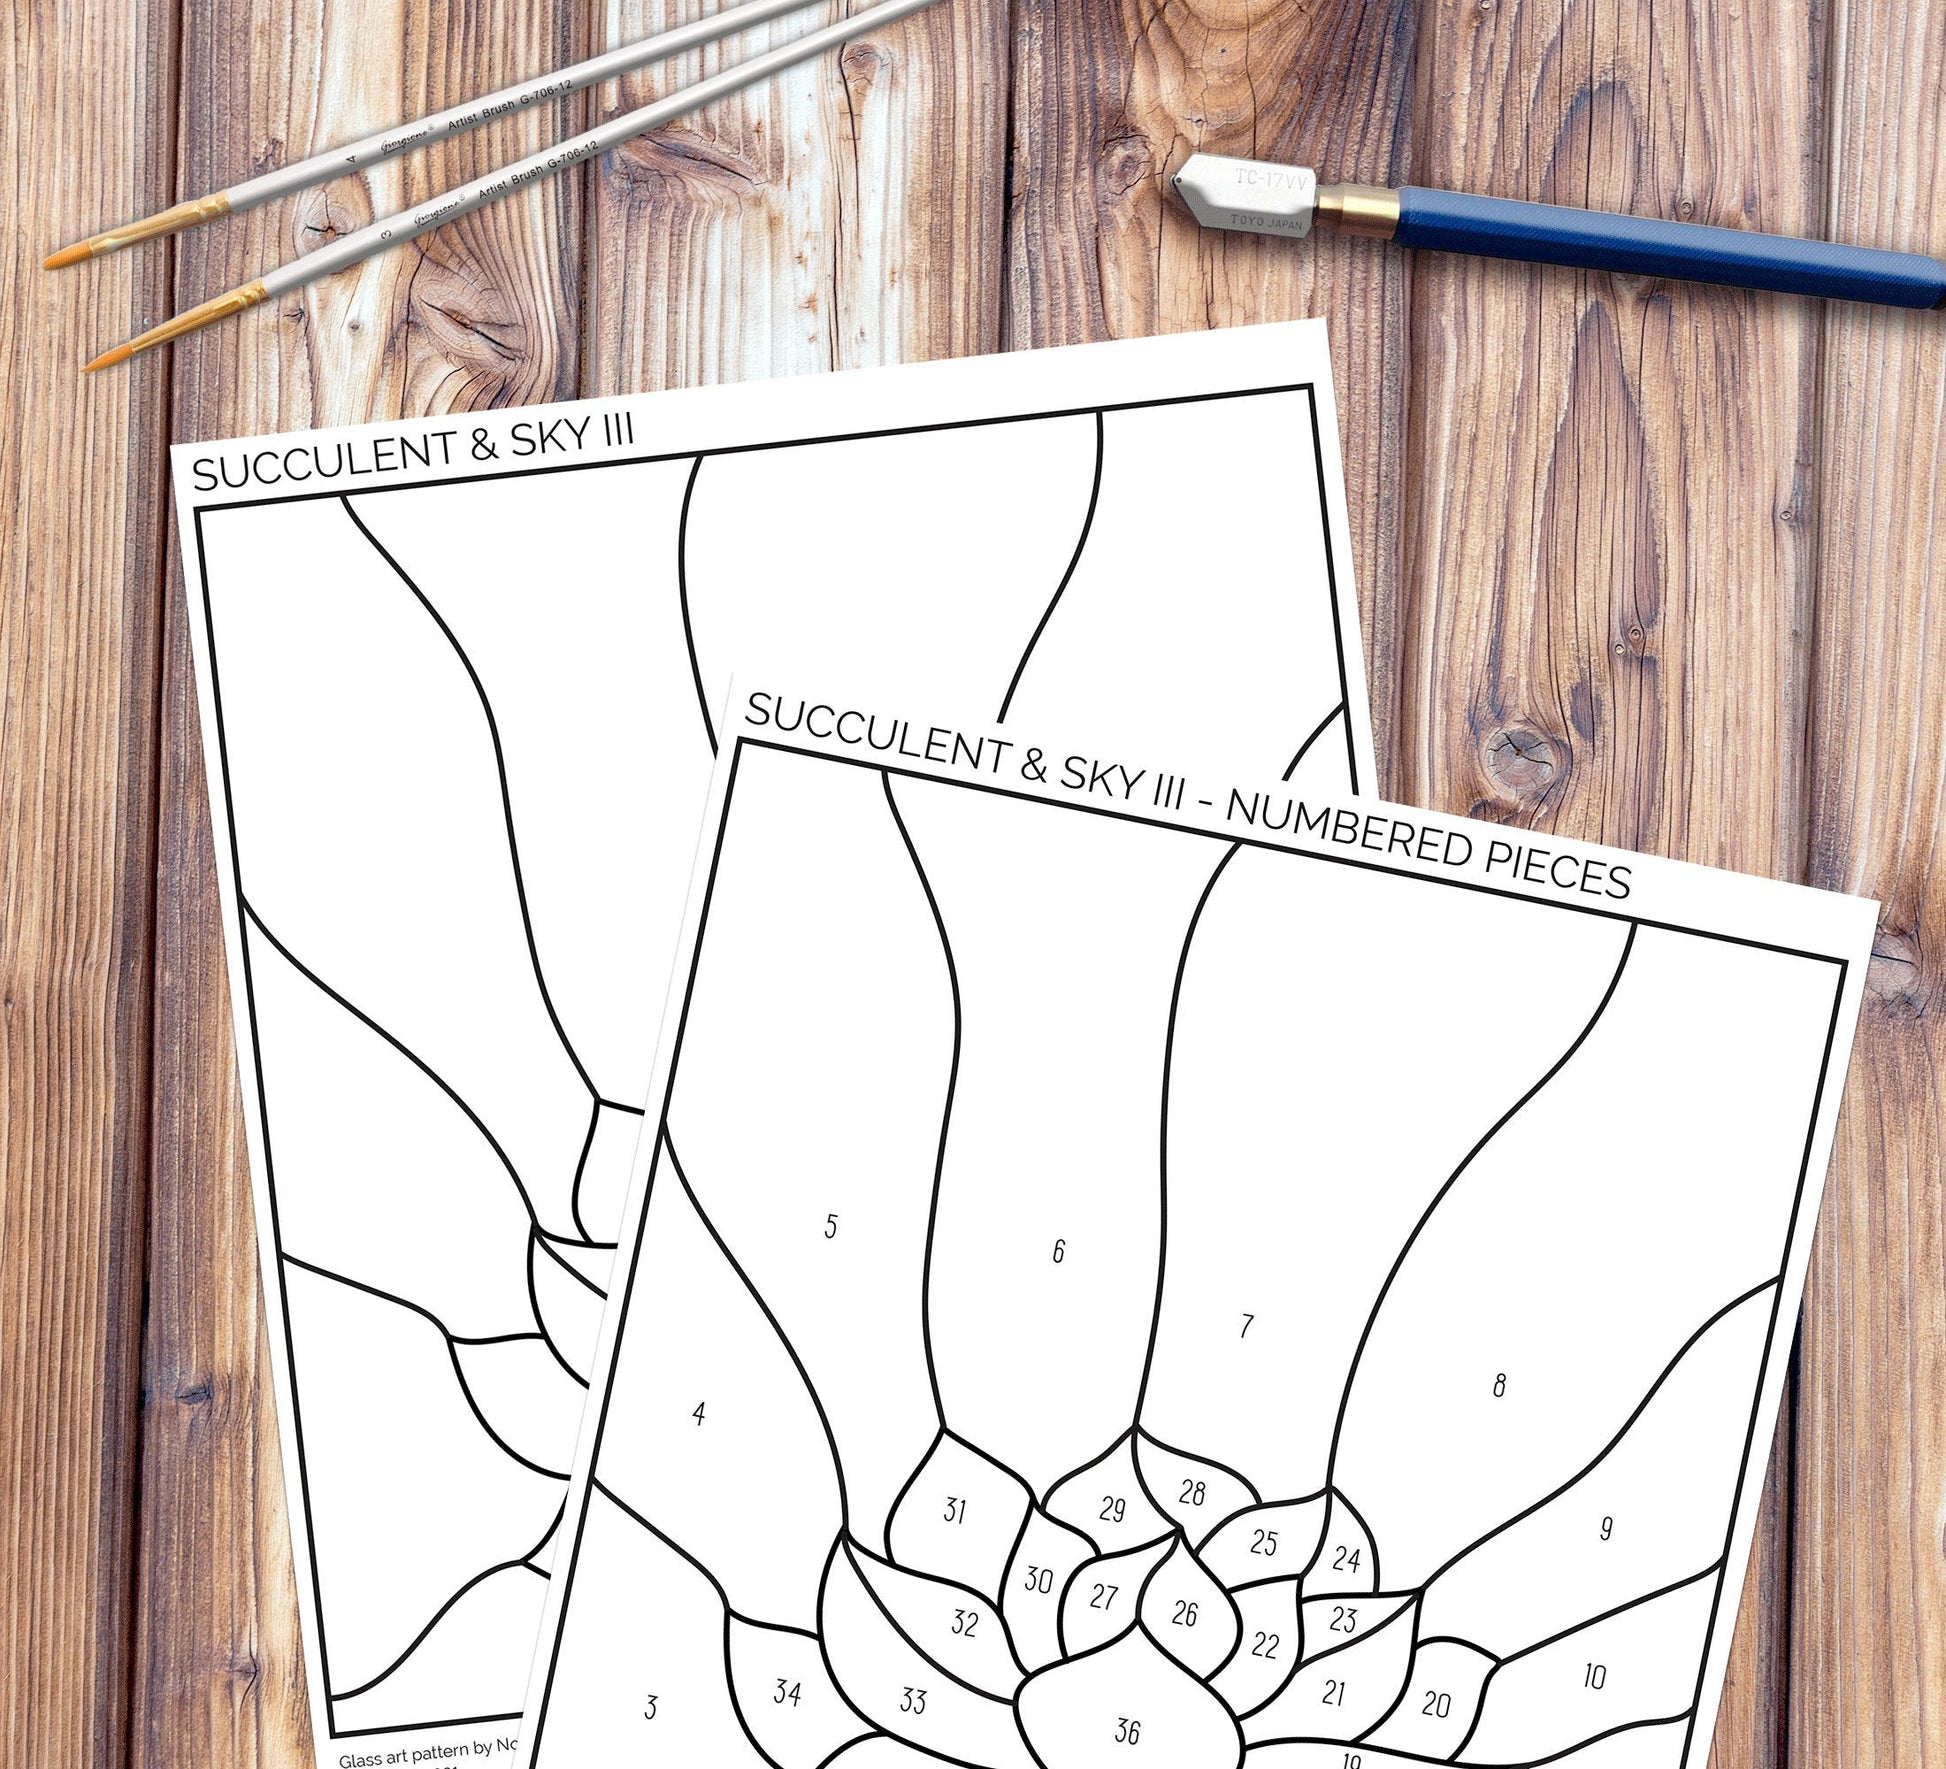 Sample of the clean and numbered stained glass patterns included with purchase of this succulent plant panel stained glass pattern download